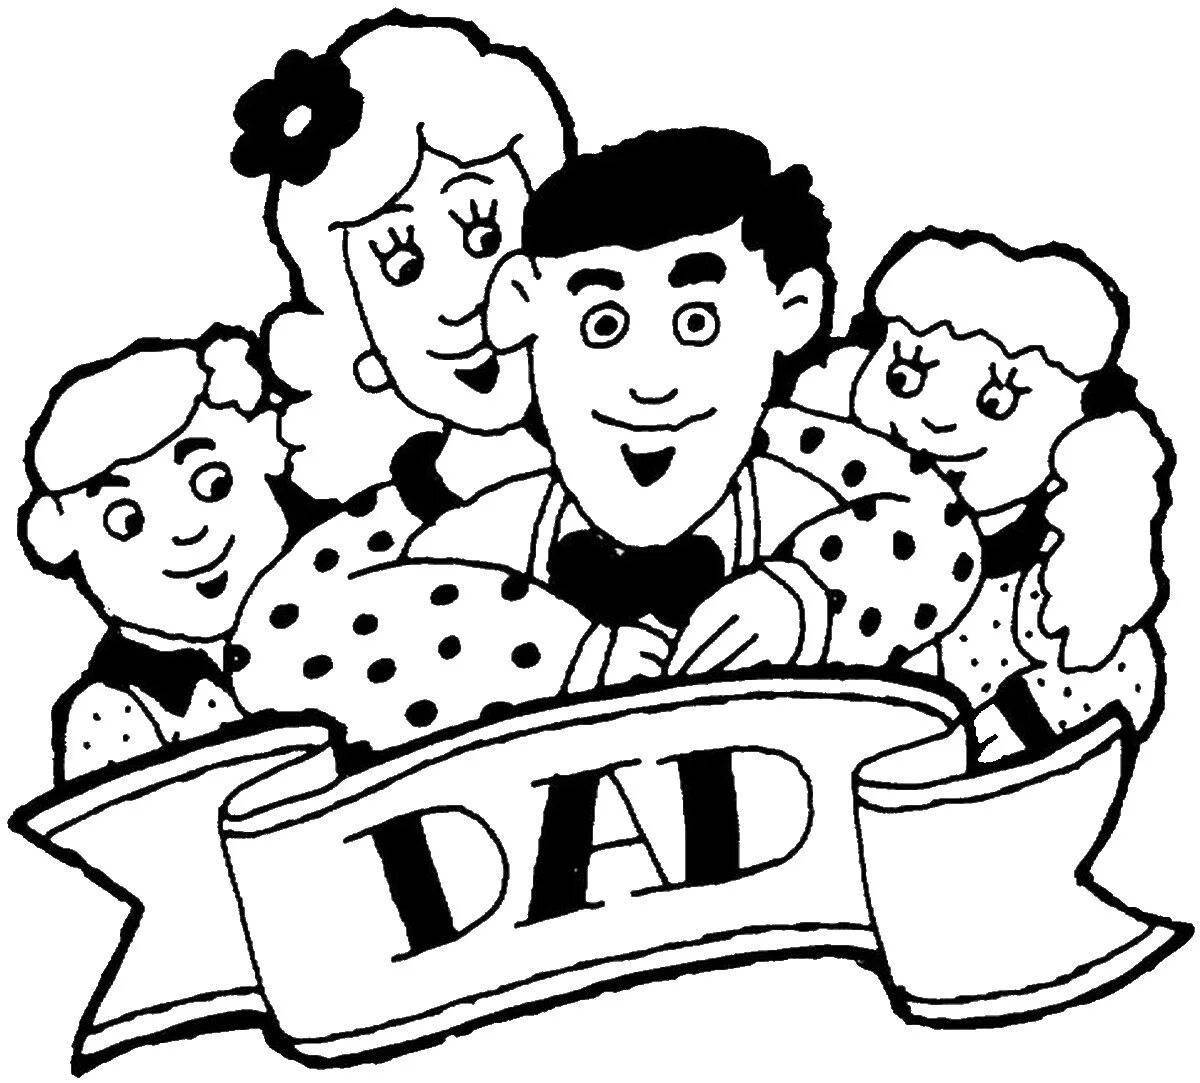 Fun coloring book for dad for dad's day